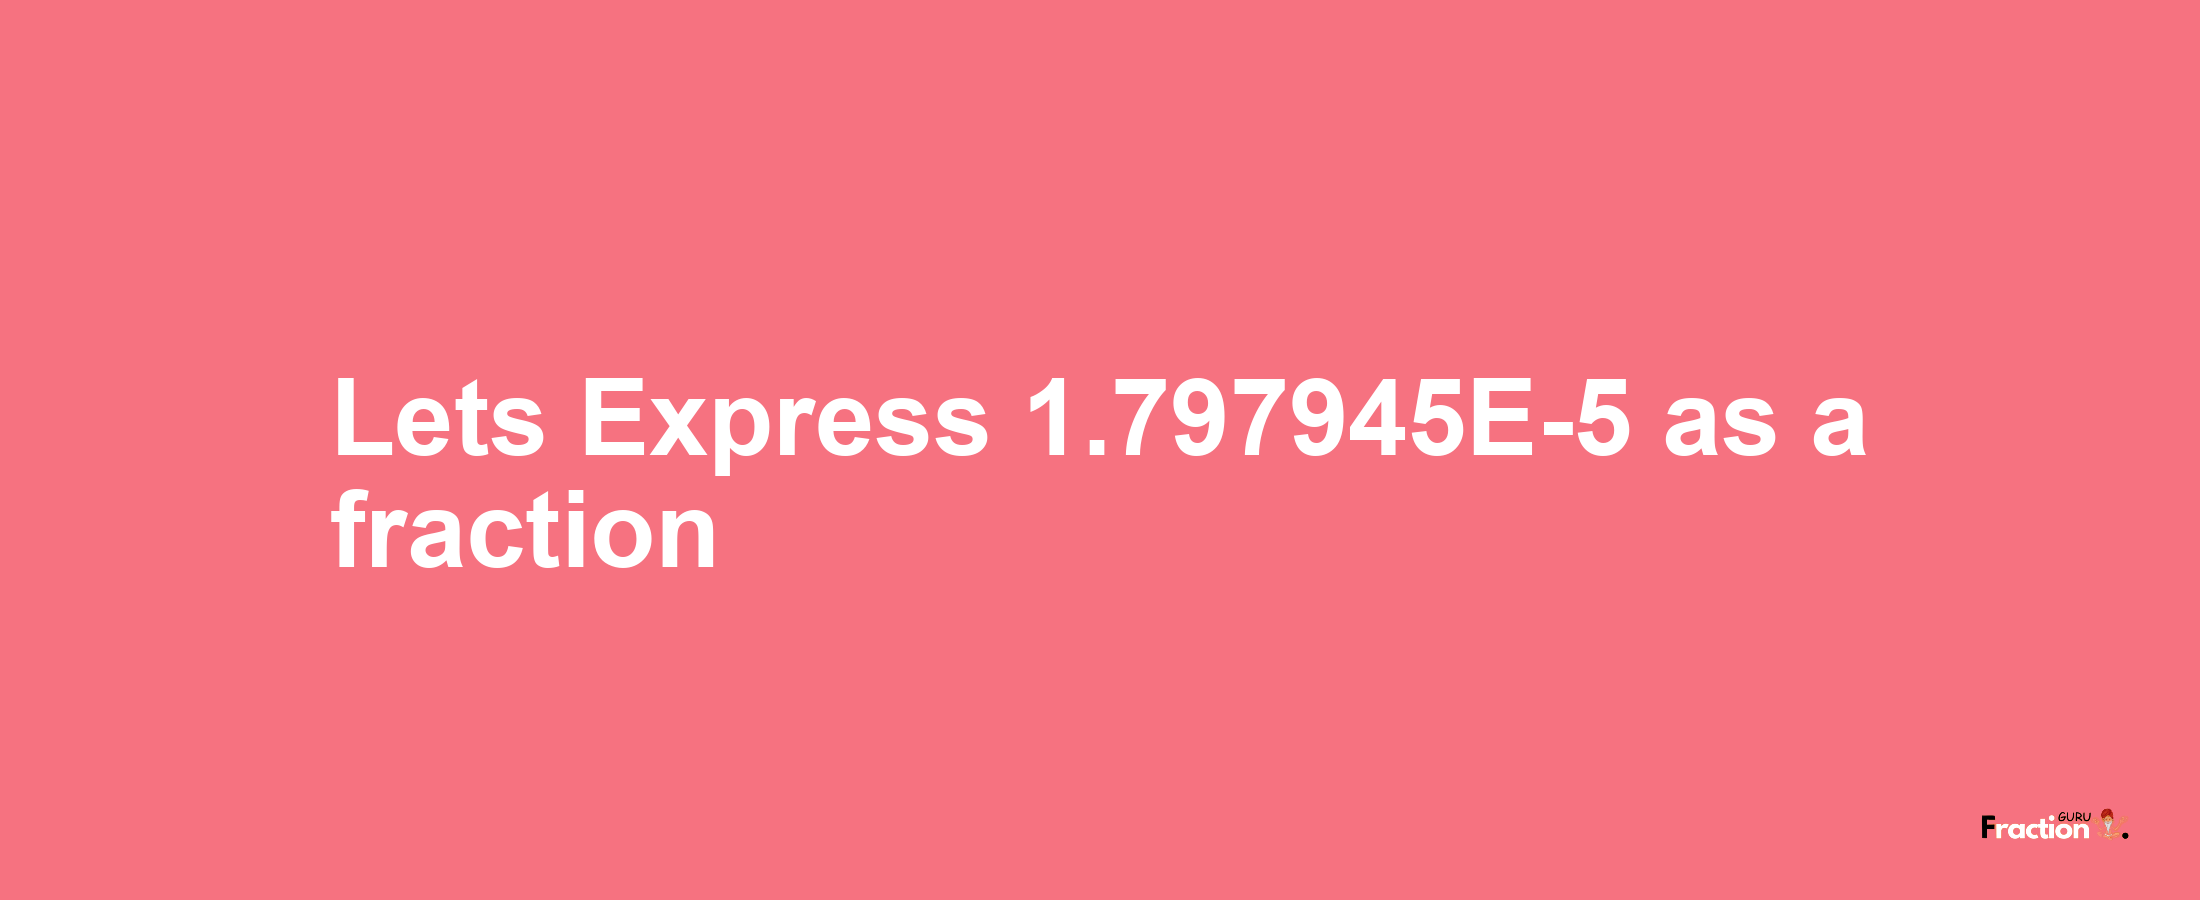 Lets Express 1.797945E-5 as afraction